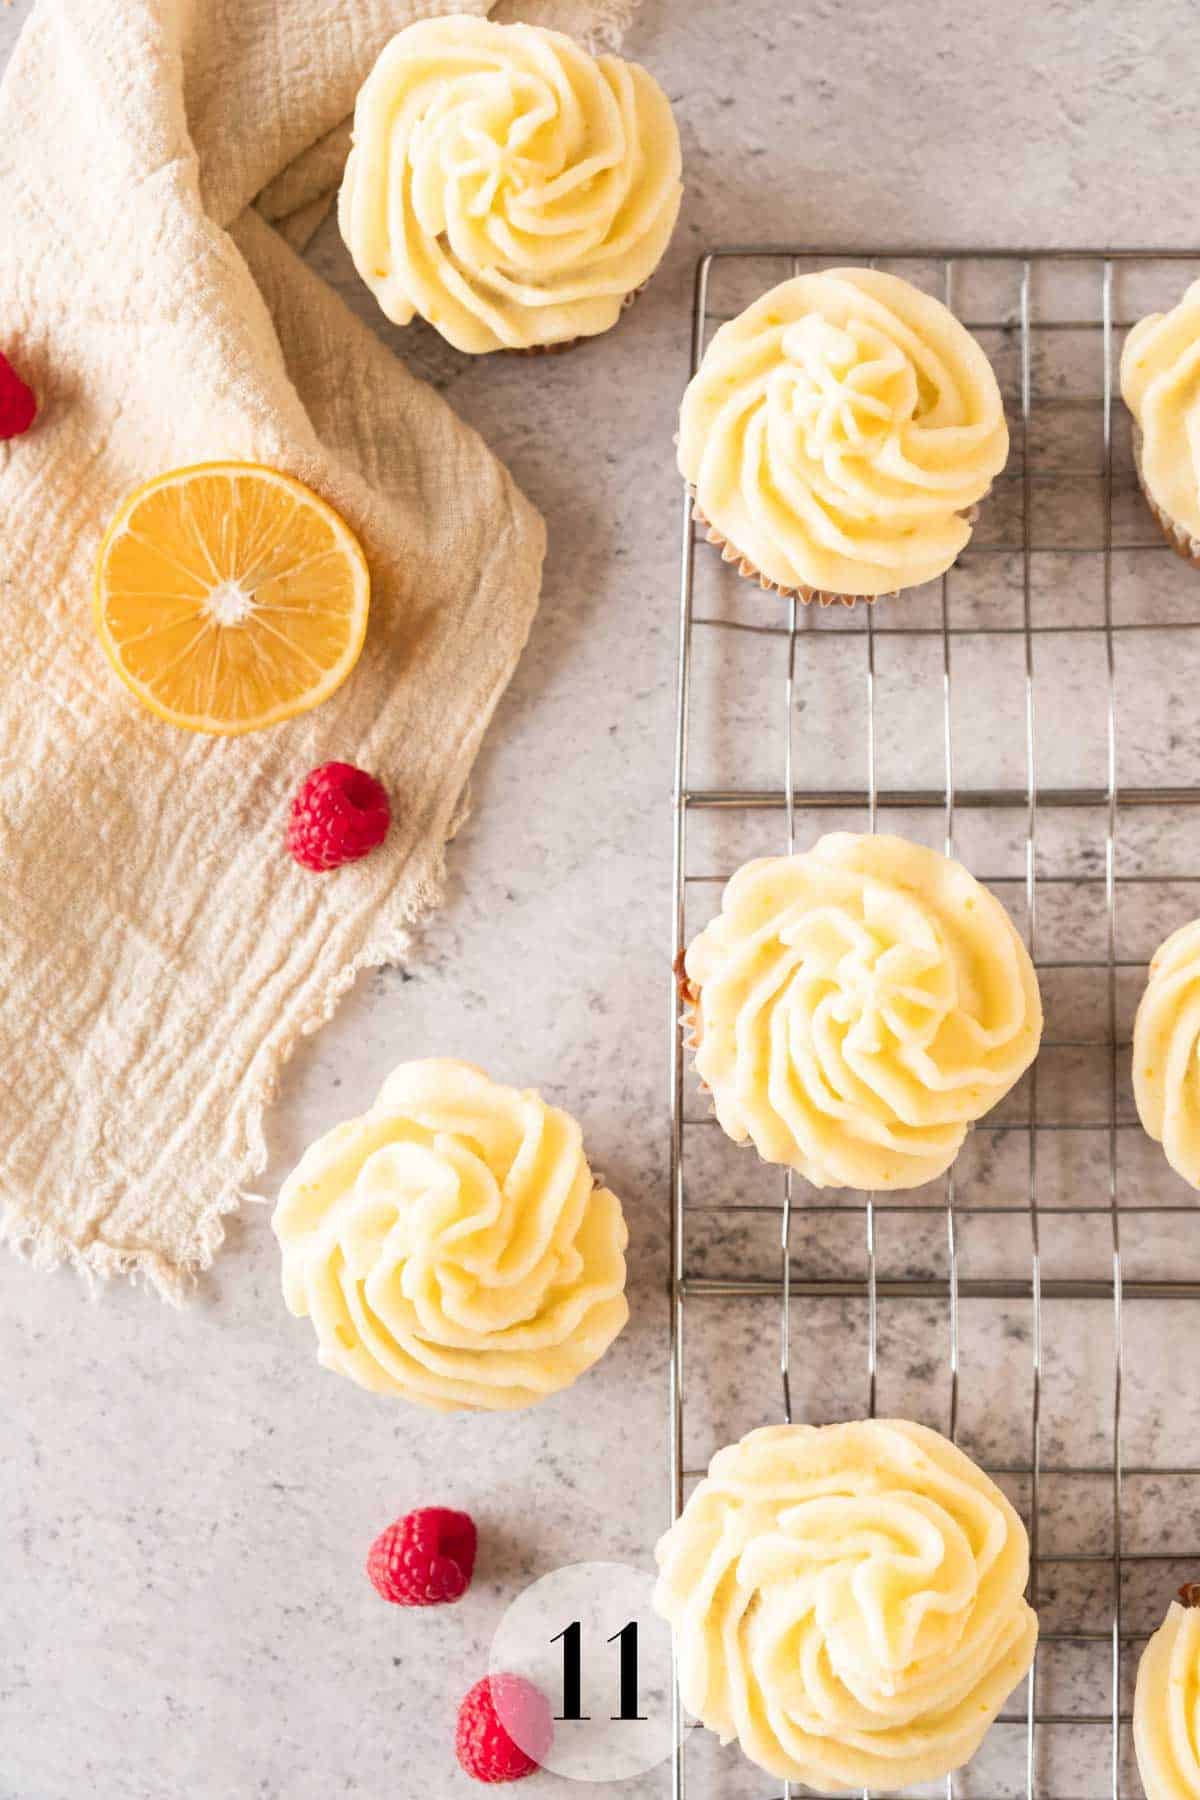 Raspberry cupcakes with lemon frosting on a cooling rack with raspberries and a lemon on the table.